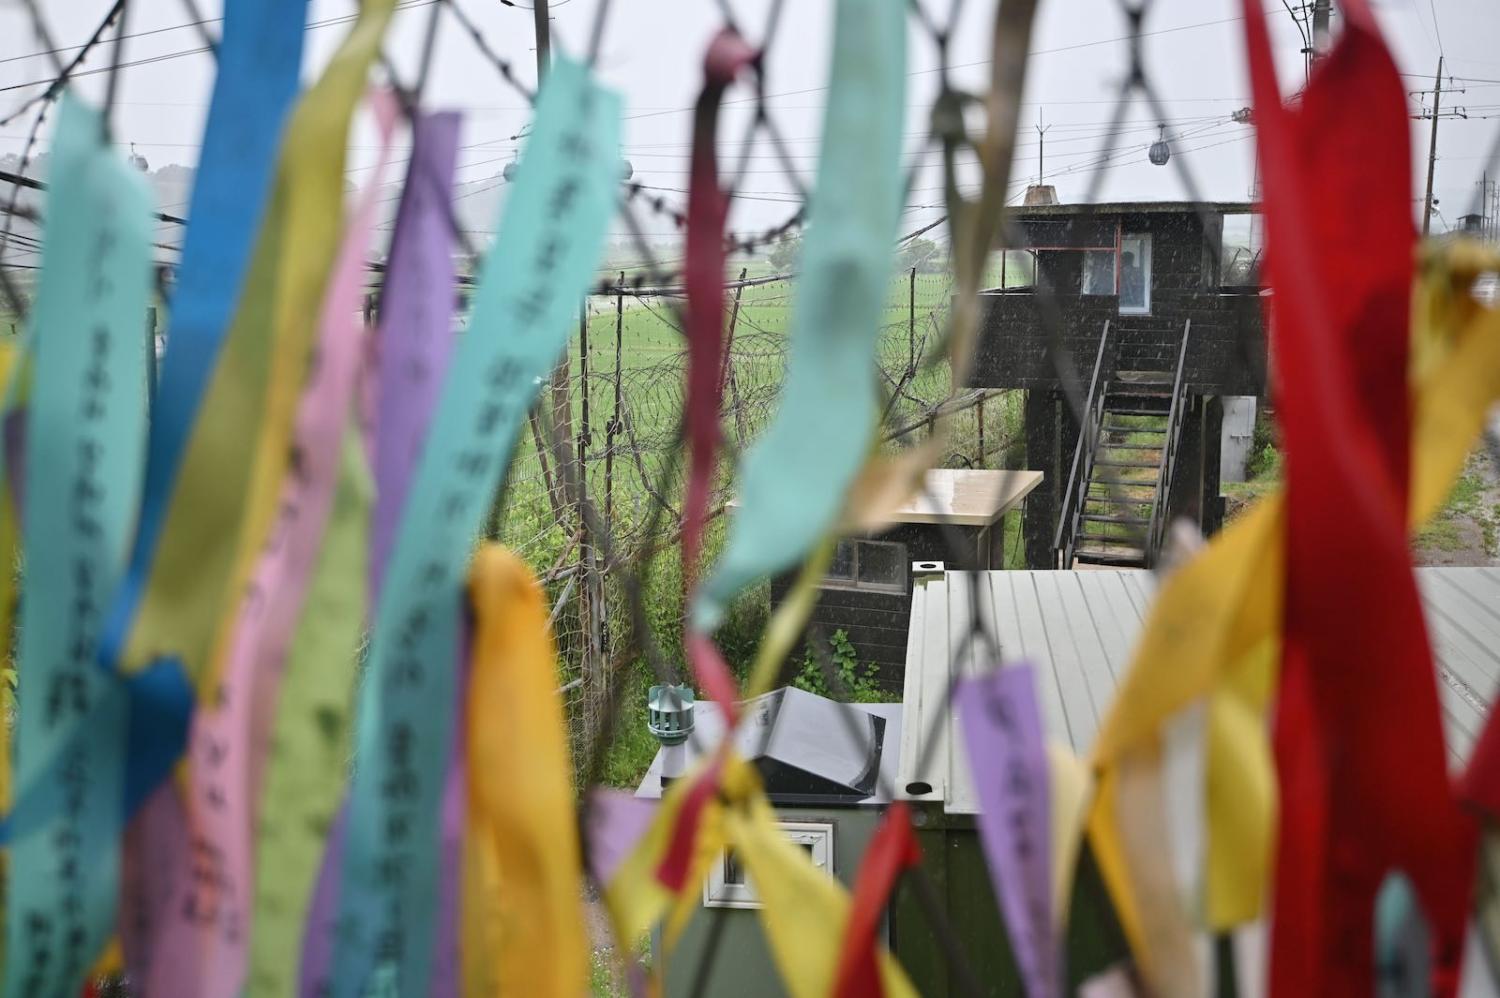 A South Korean guard post seen through a fence decorated with ribbons with messages of peace and reunification, at Imjingak peace park in the border city of Paju, June 2020 (Jung Yeon-je/AFP via Getty Images)